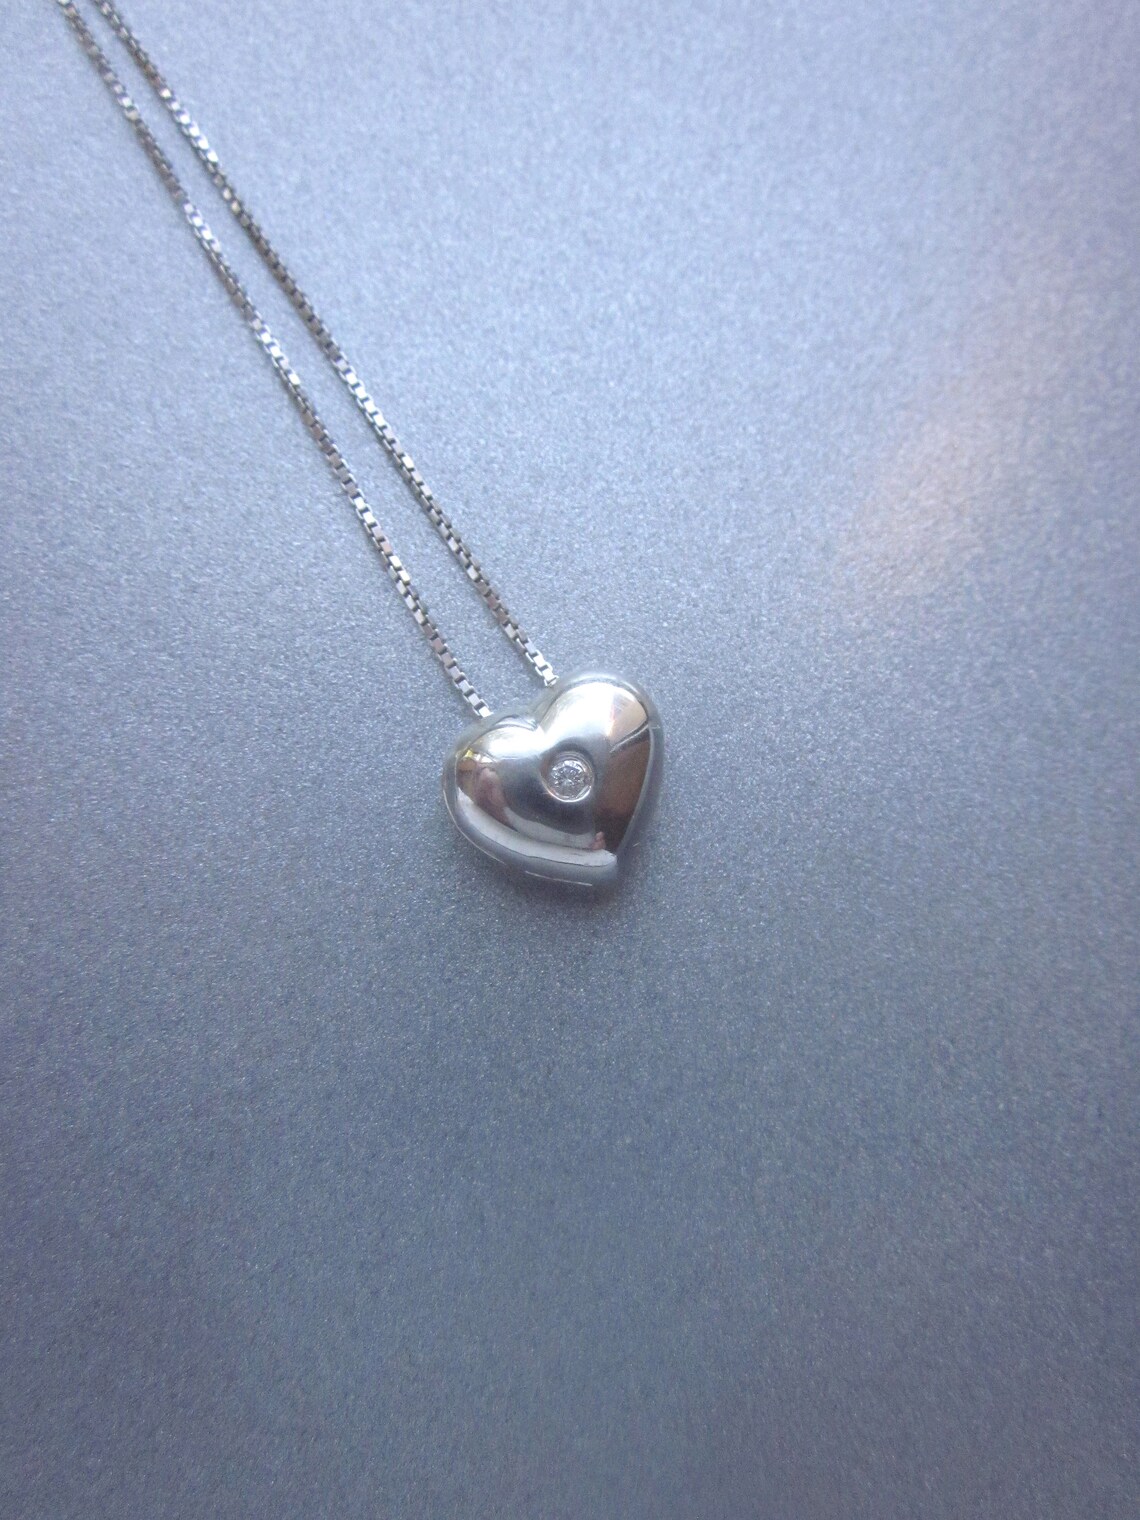 14kt White Gold Heart with Diamond 14kt Chain | Etsy